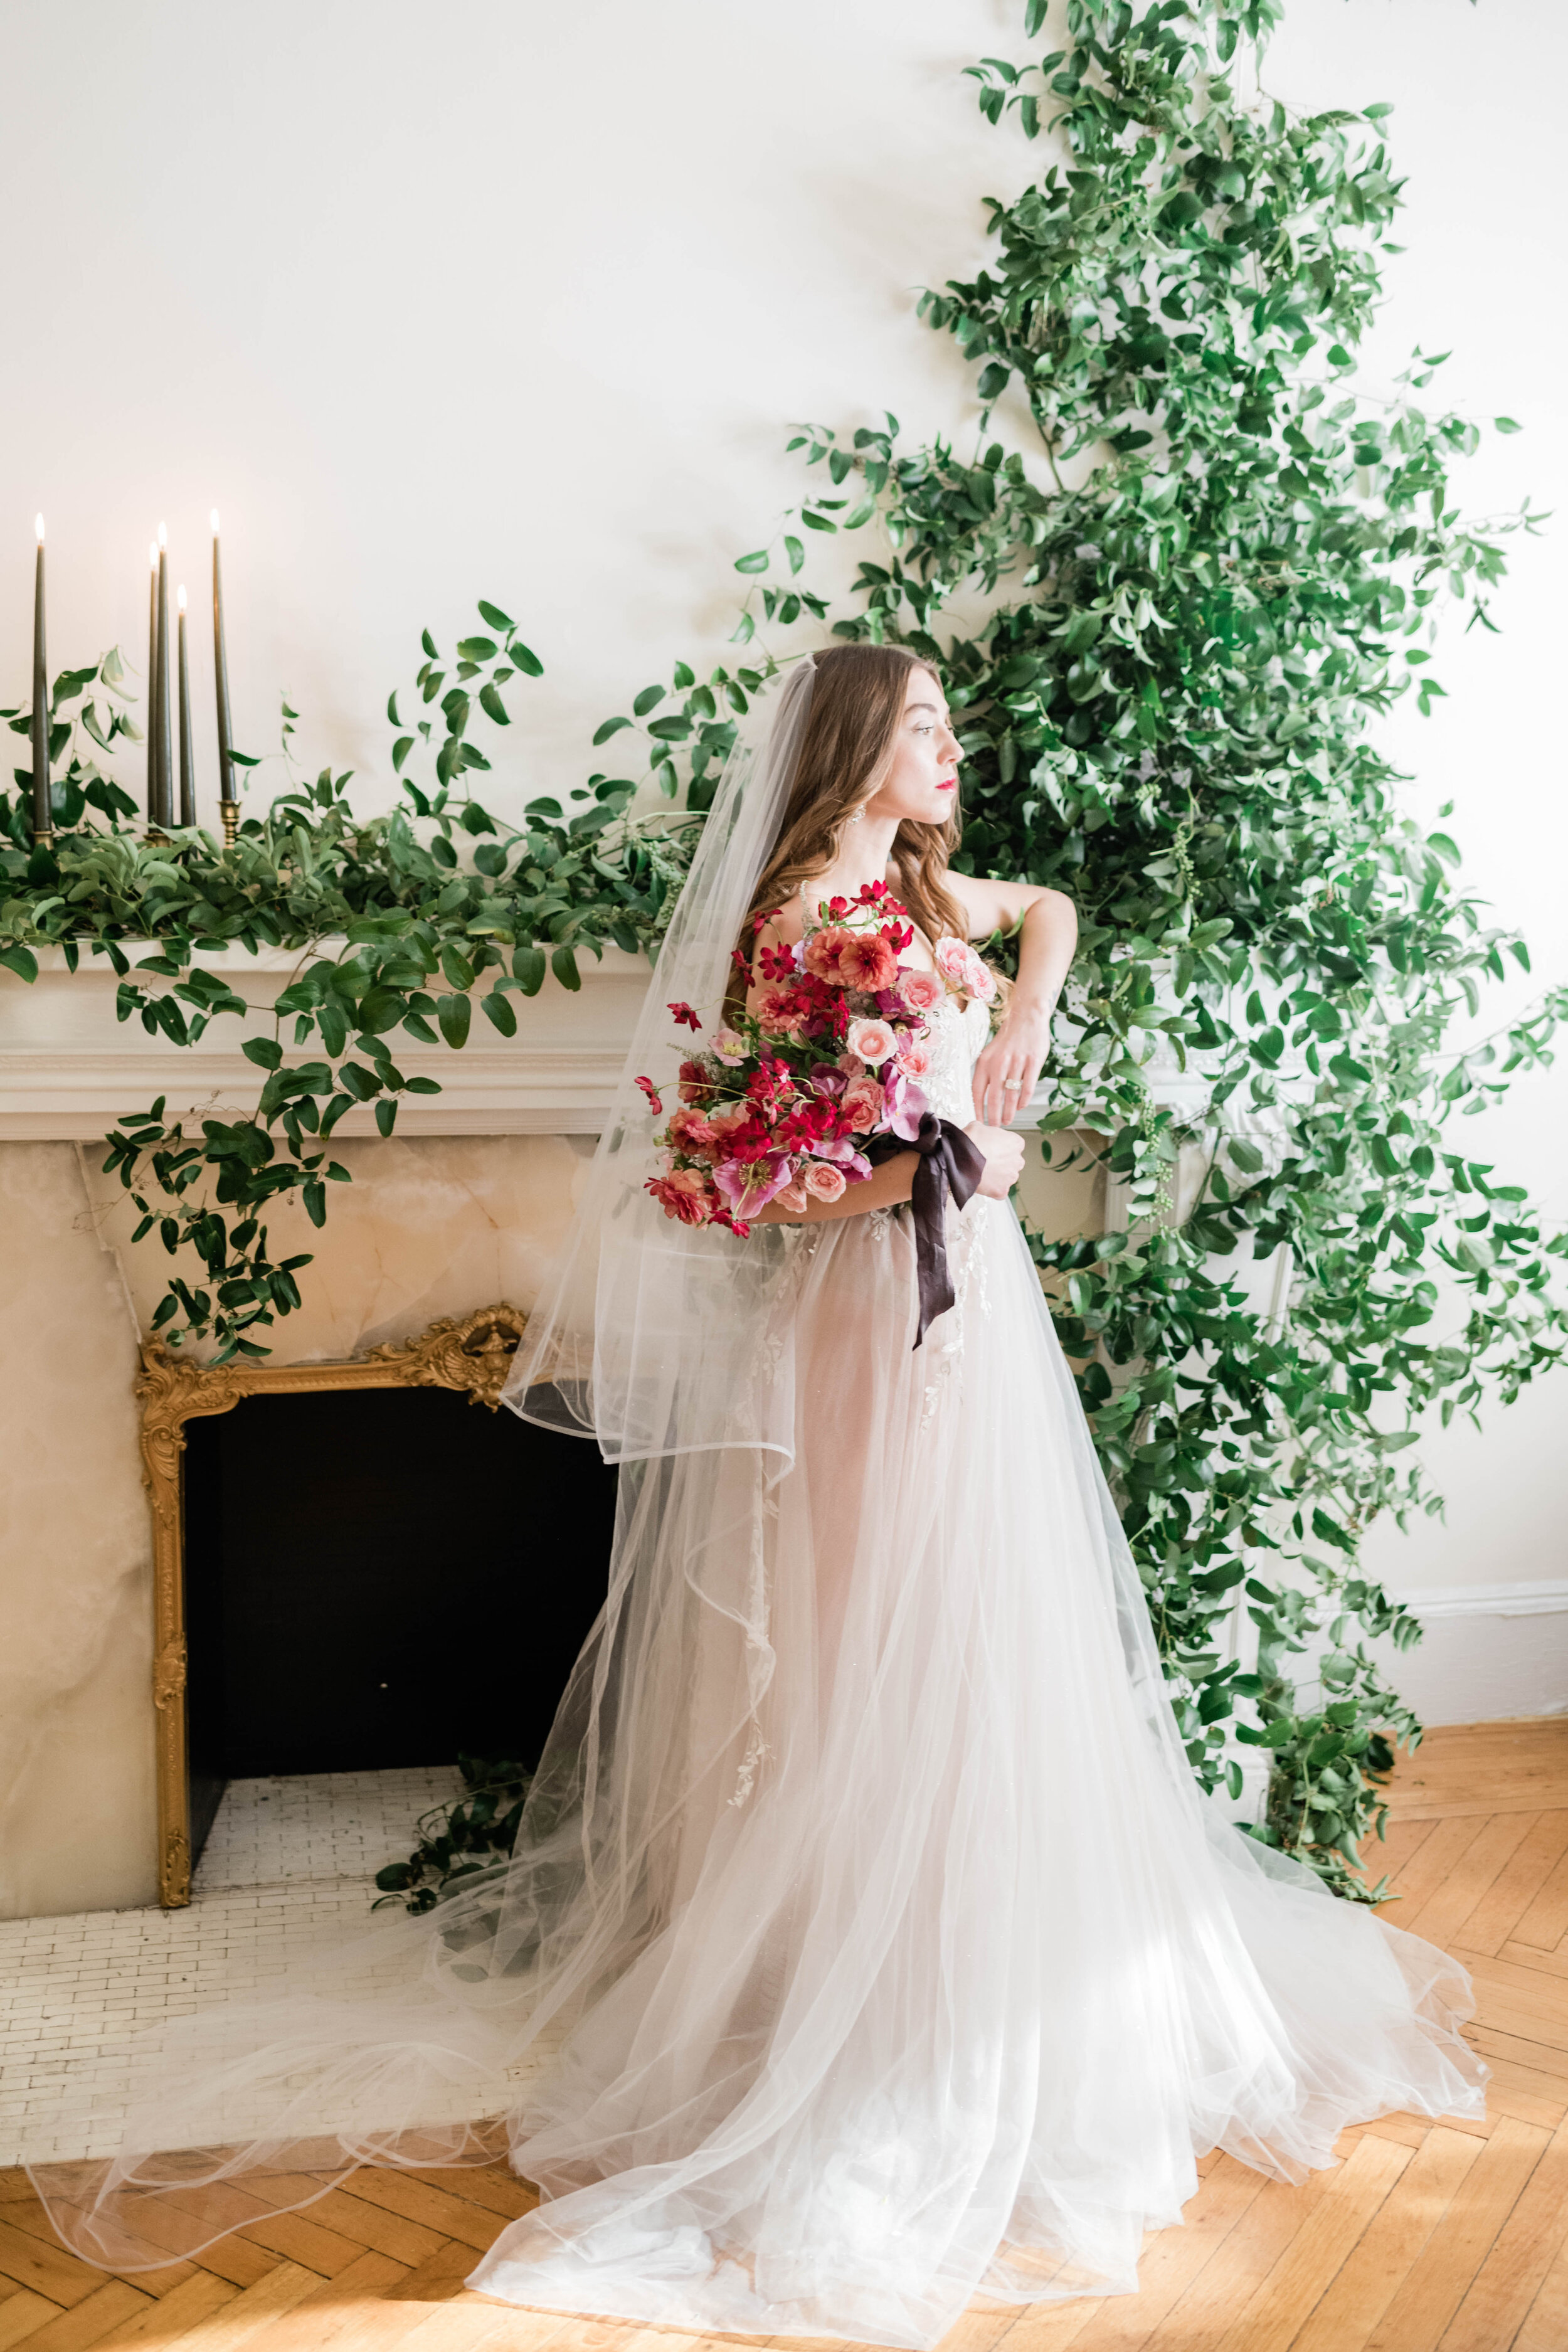 Bridal Editorial Portraits in New York City near Central Park with blush gown and monochrome bouquet by Liz Andolina